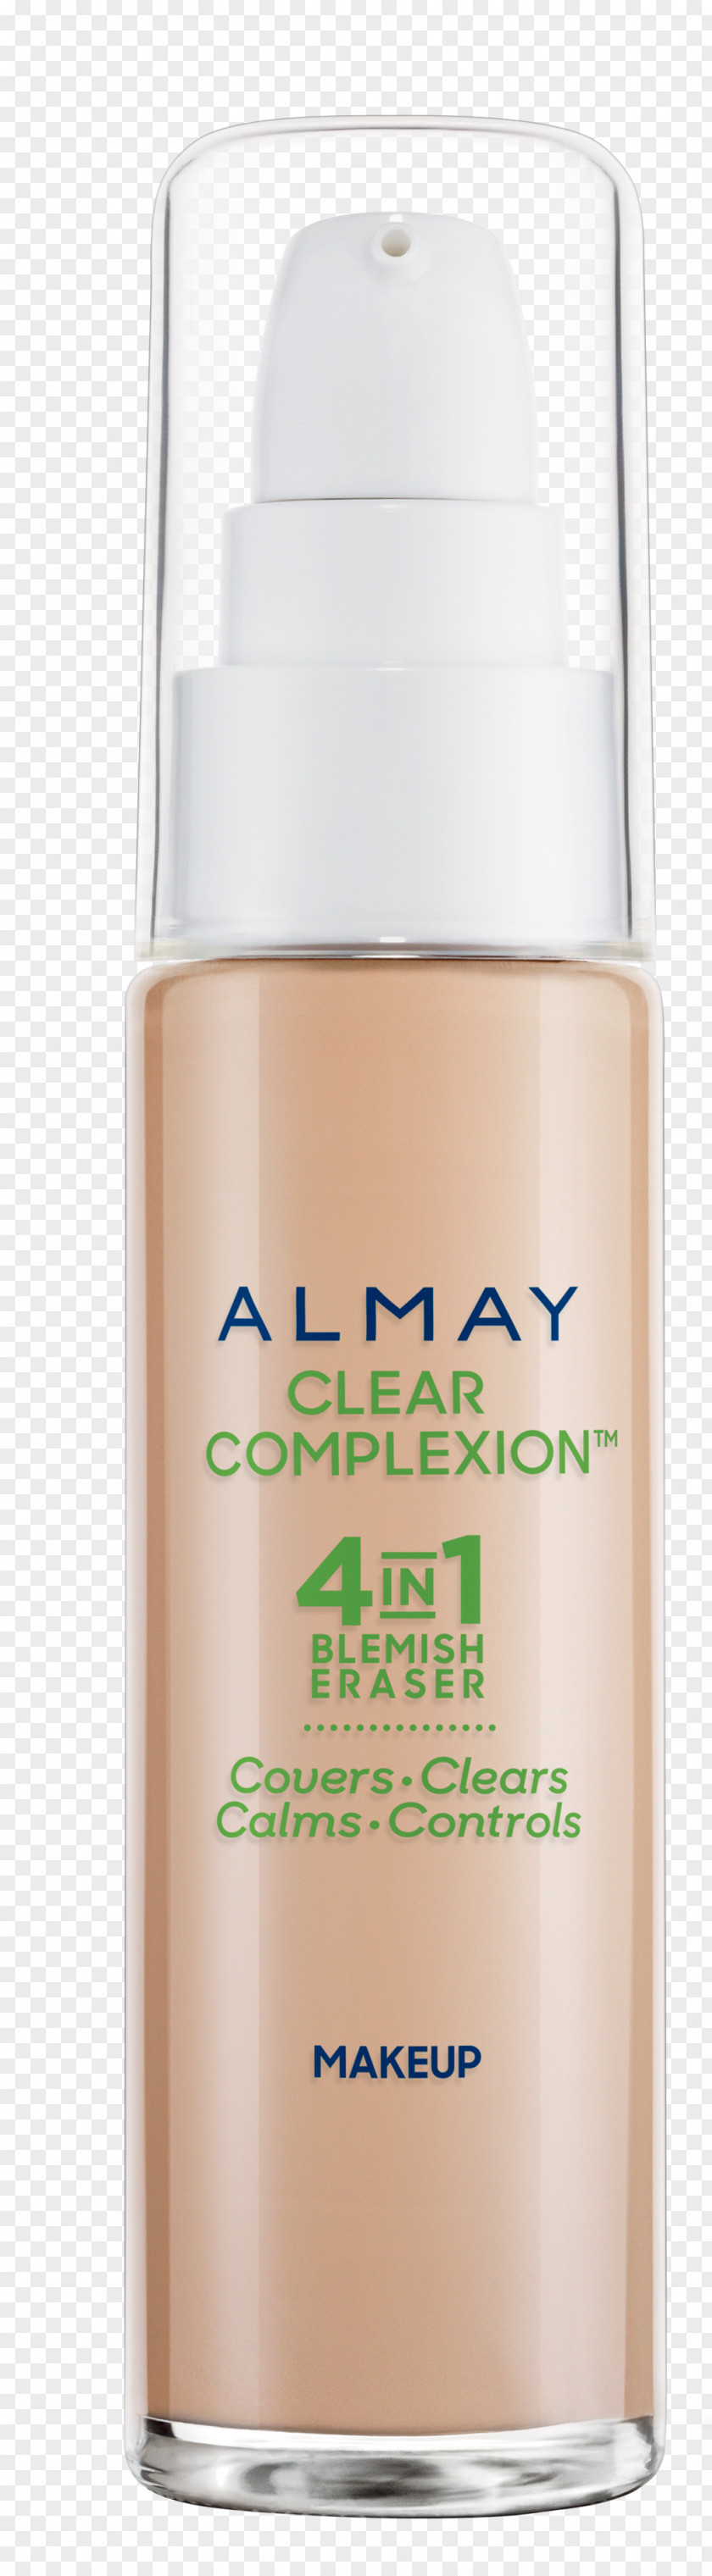 Almay Clear Complexion Makeup Cosmetics Lotion Revlon PNG